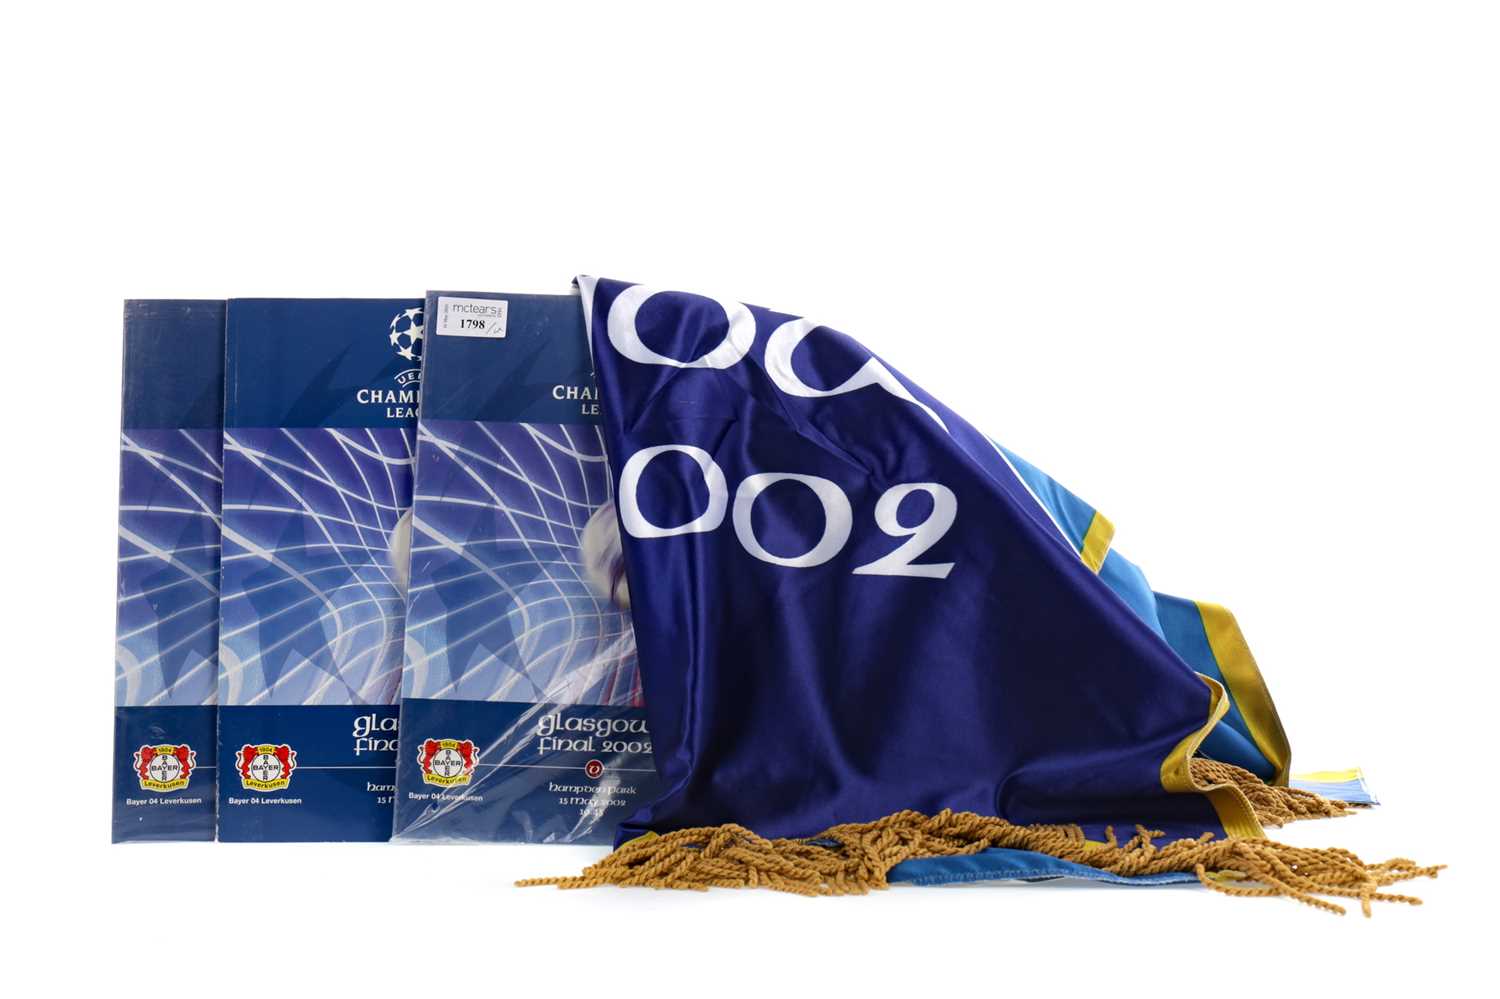 Lot 1798 - AN OFFICIAL BANNER FROM THE 2002 CHAMPIONS LEAGUE FINAL, ALONG WITH THREE PROGRAMMES